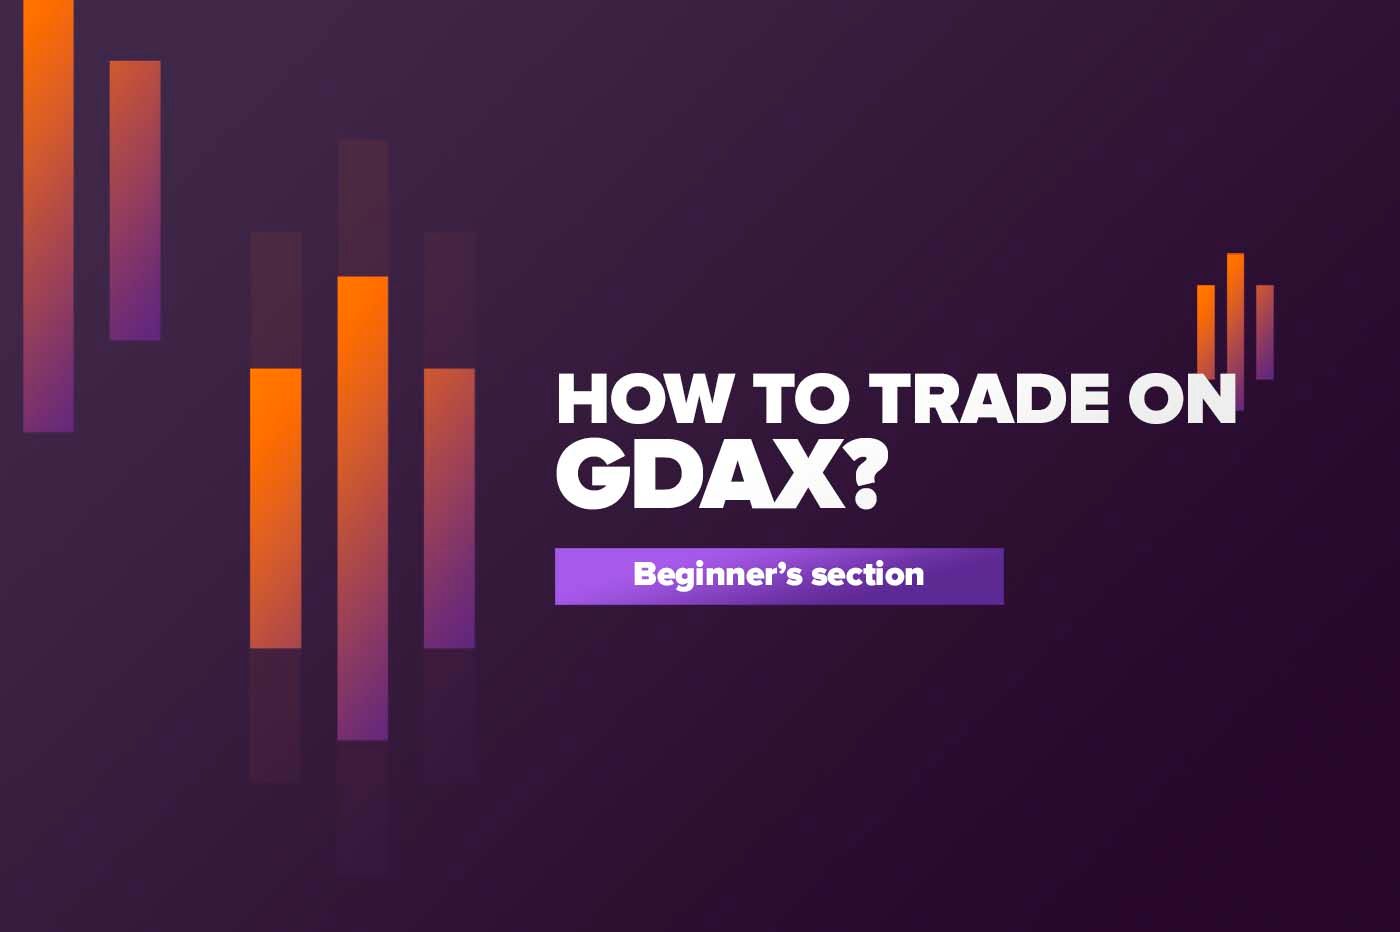 How to trade on GDAX?